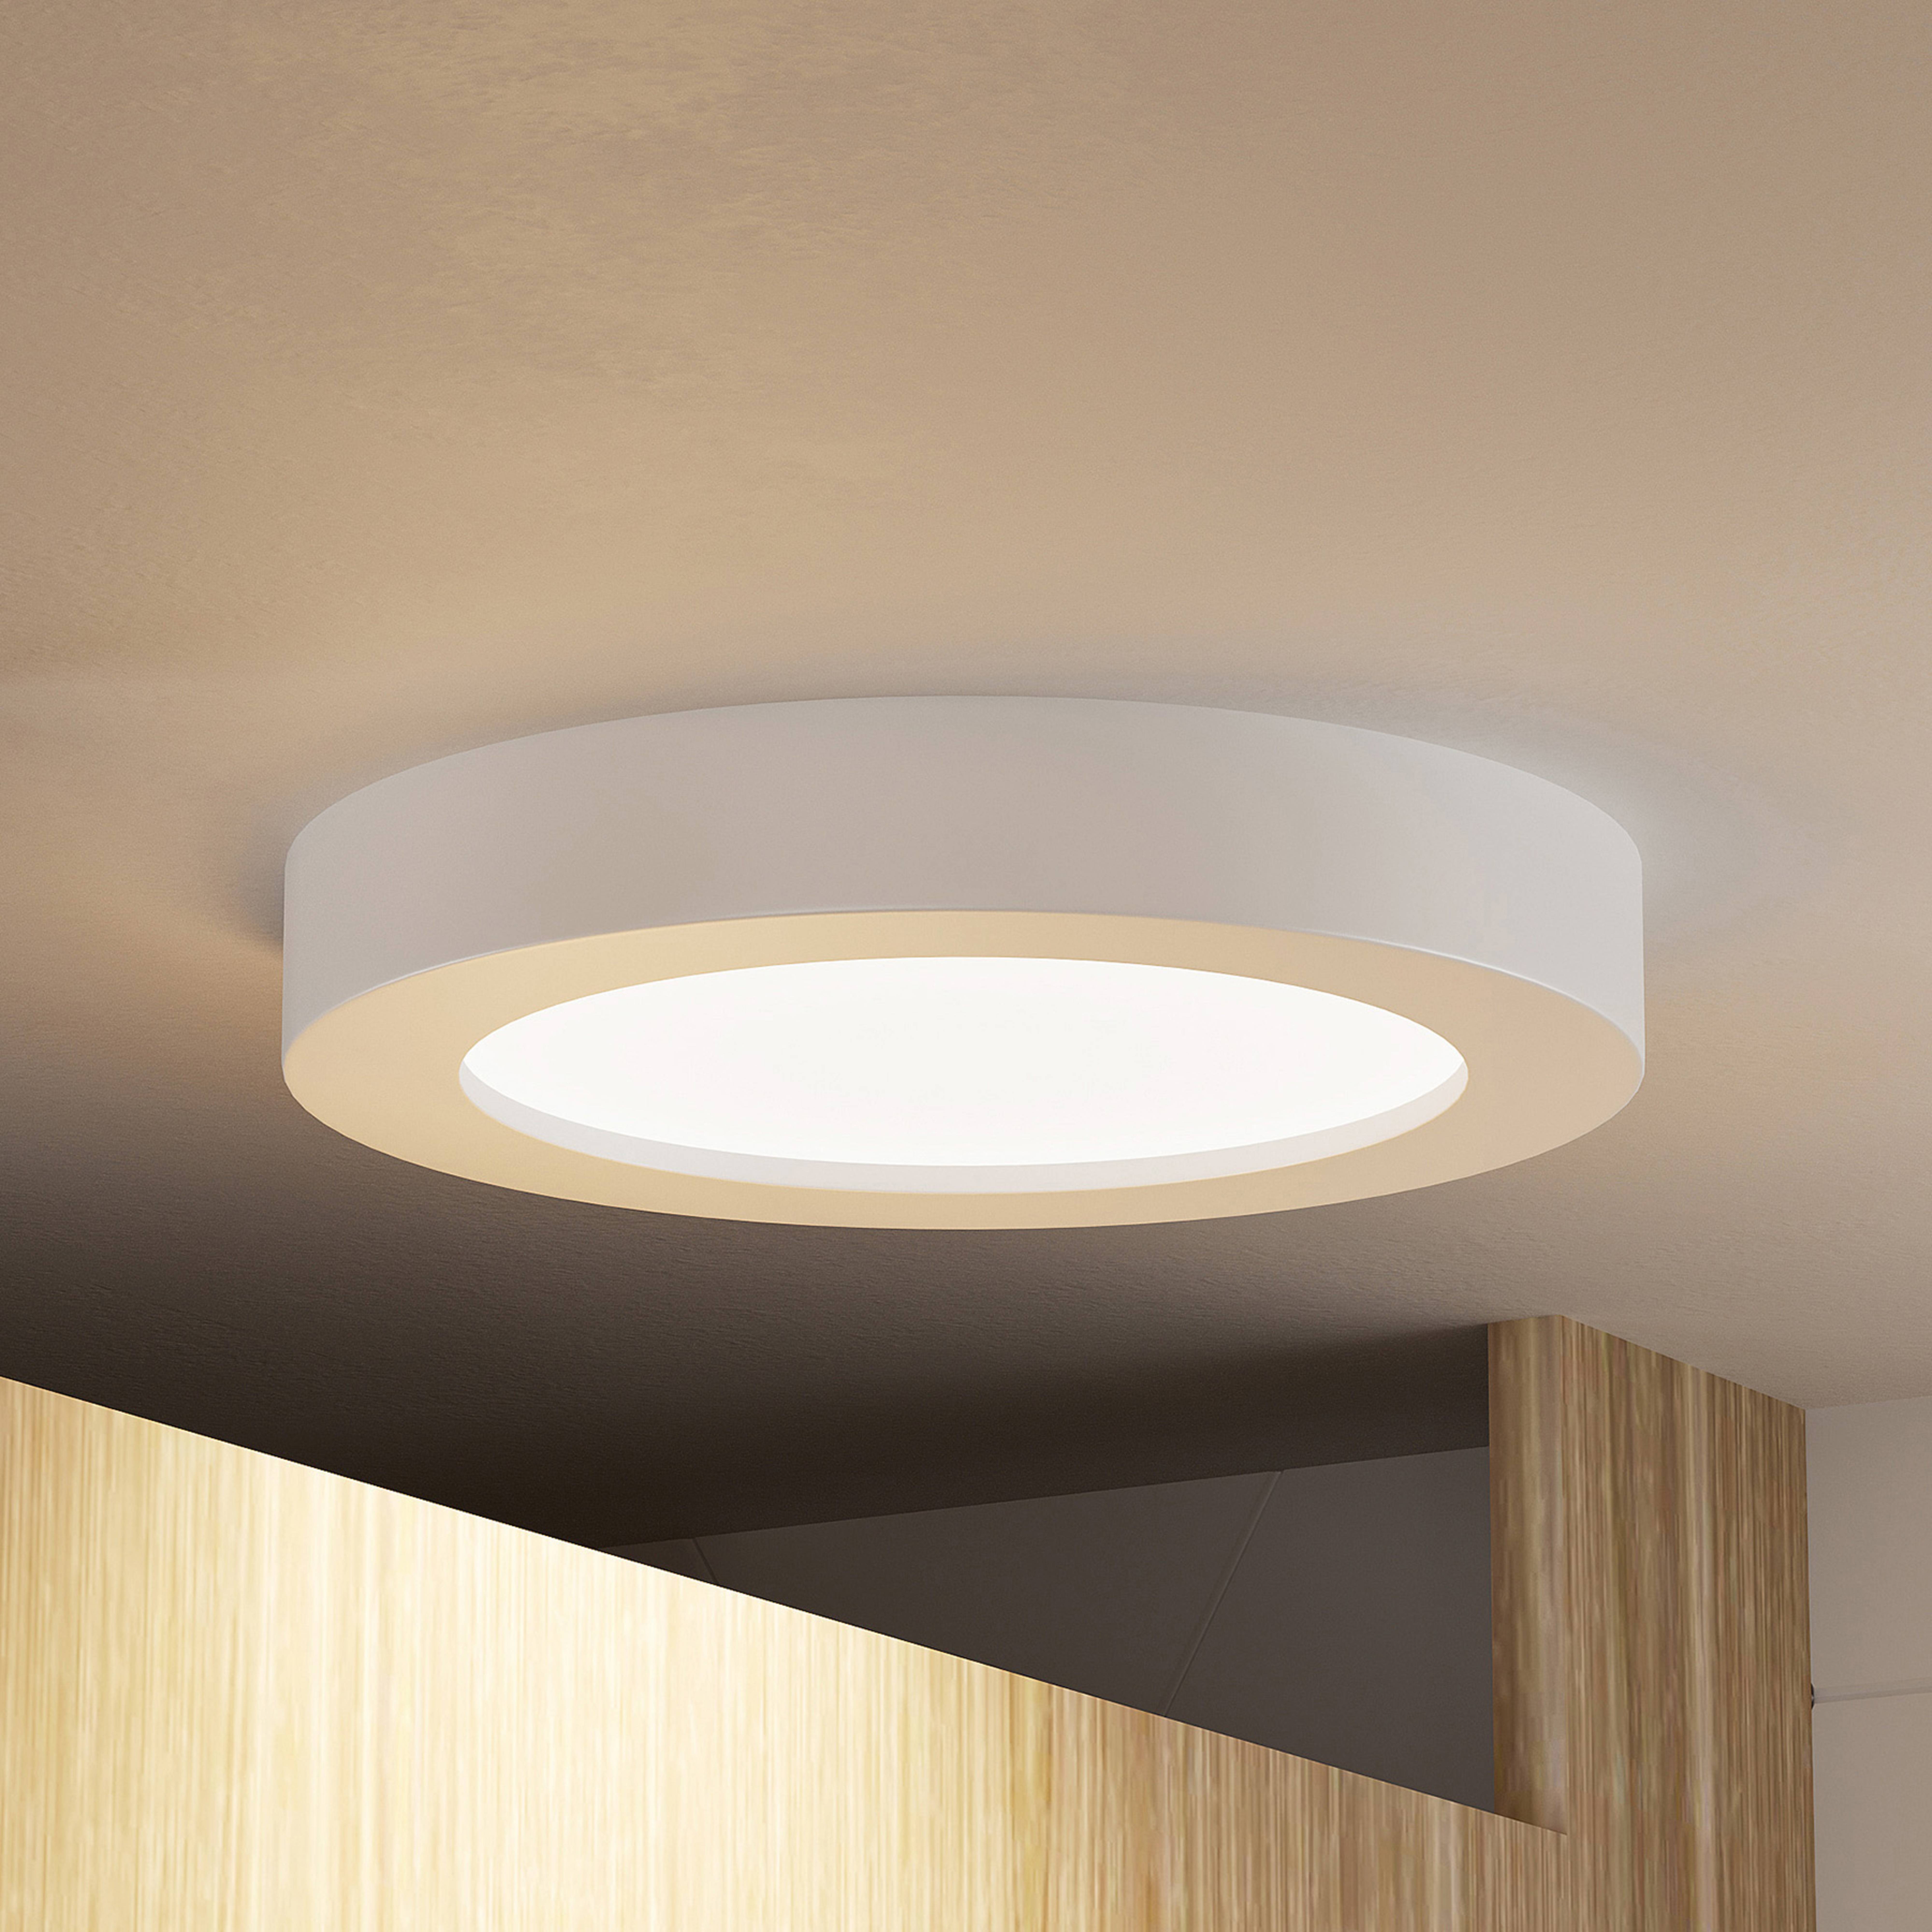 Prios LED ceiling light Edwina, white, 22.6 cm, dimmable